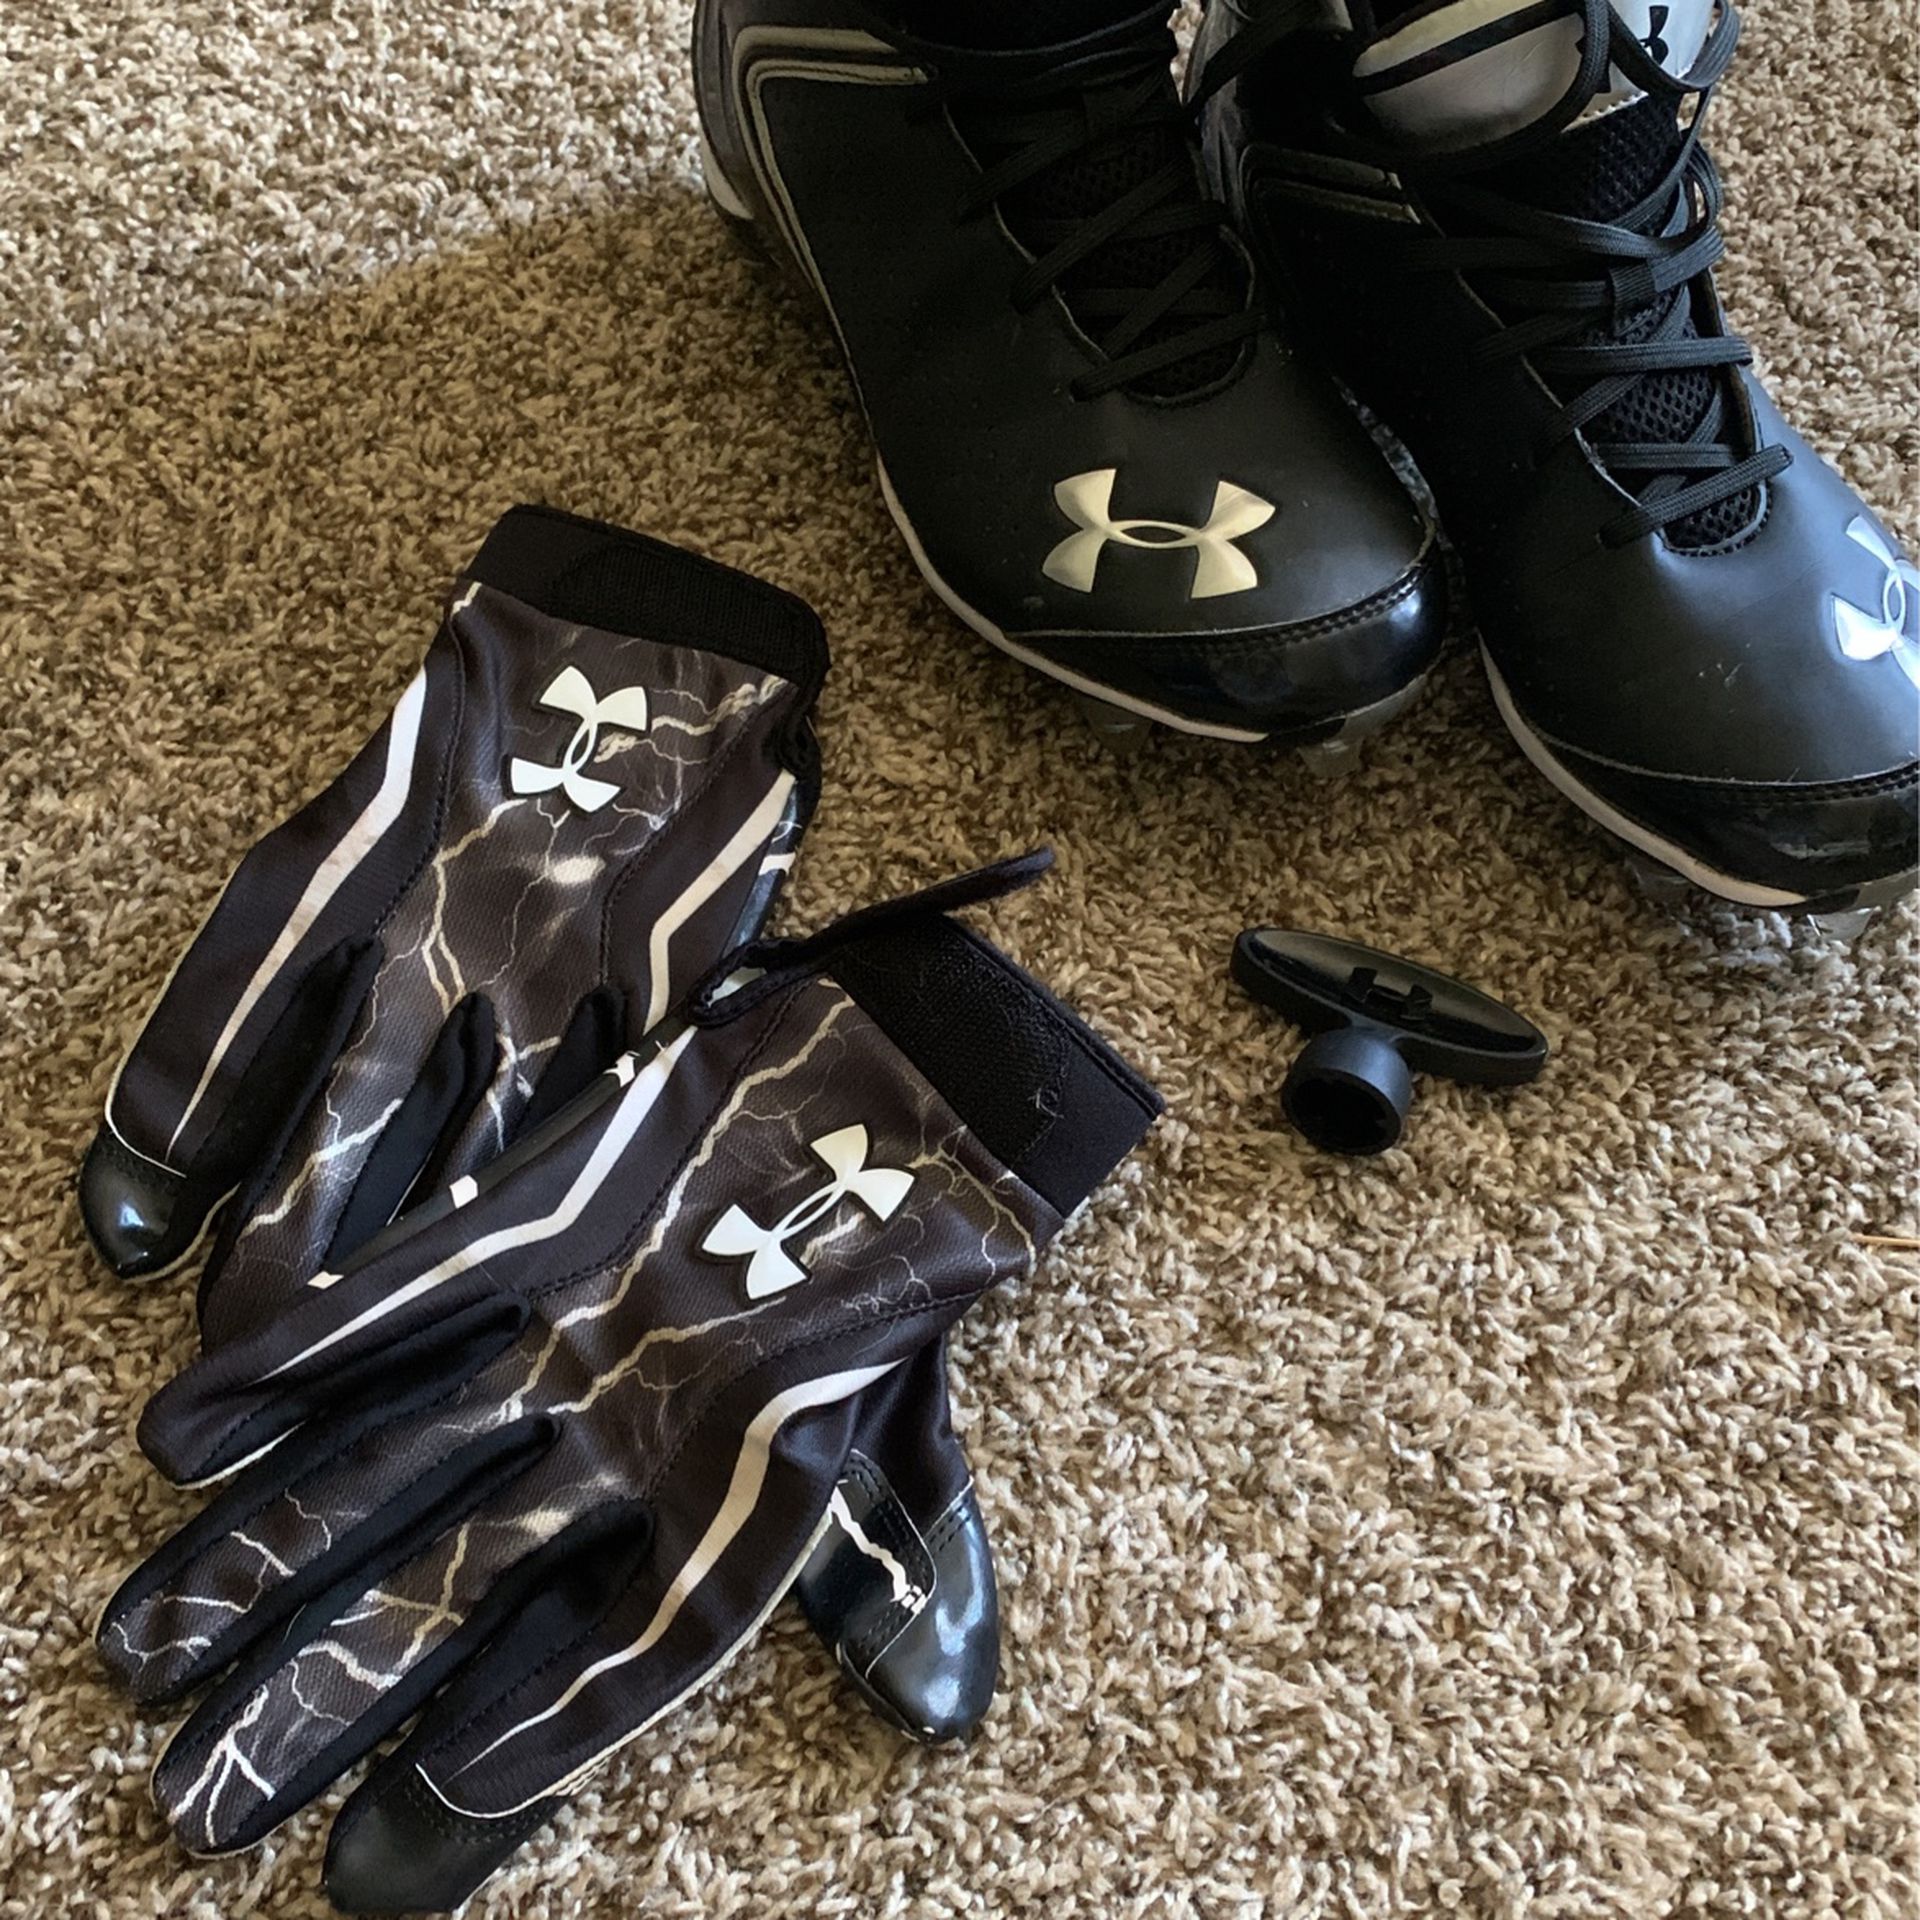 Under Armour Football Cleats And Gloves